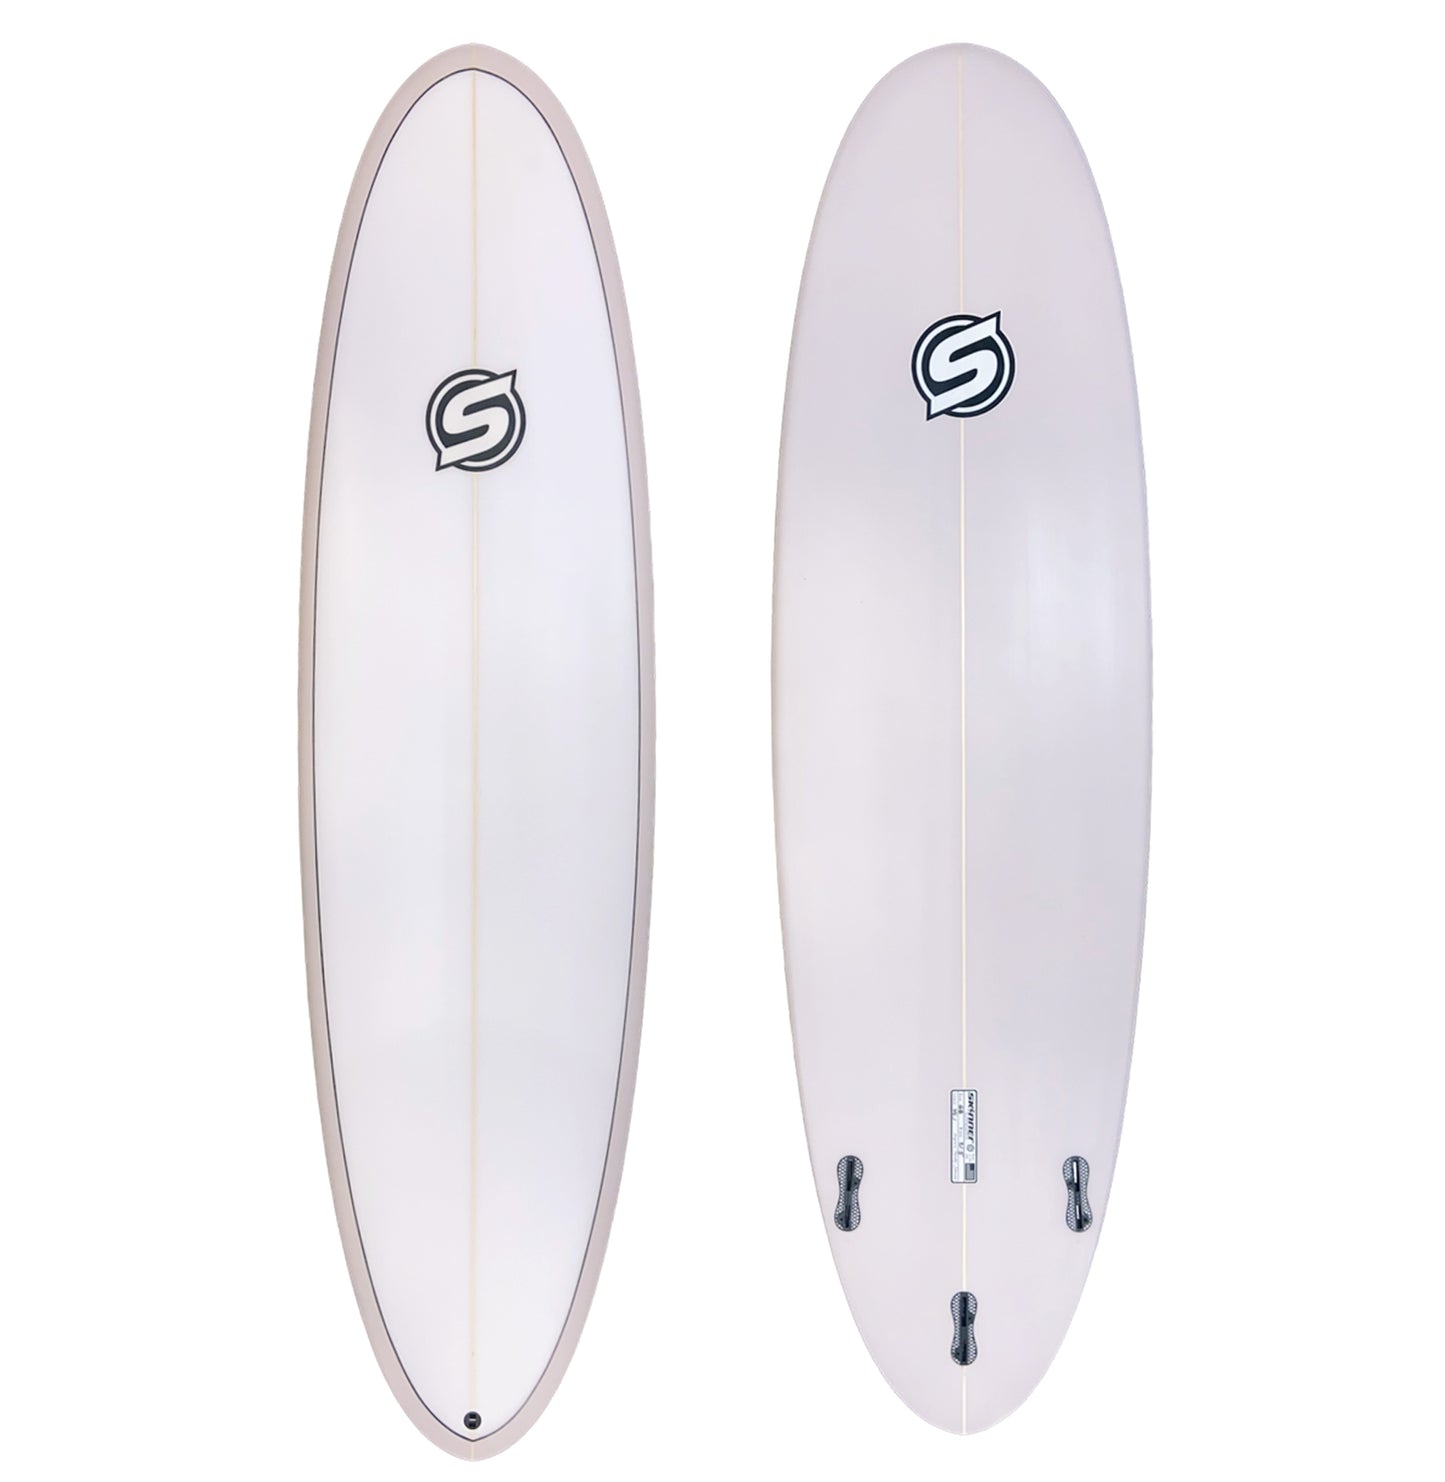 Skinner Surfboards 6'8" x 21.5 x 2.75" 46.1L Poly Double Ender FCS2 Tri Fin Surfboard